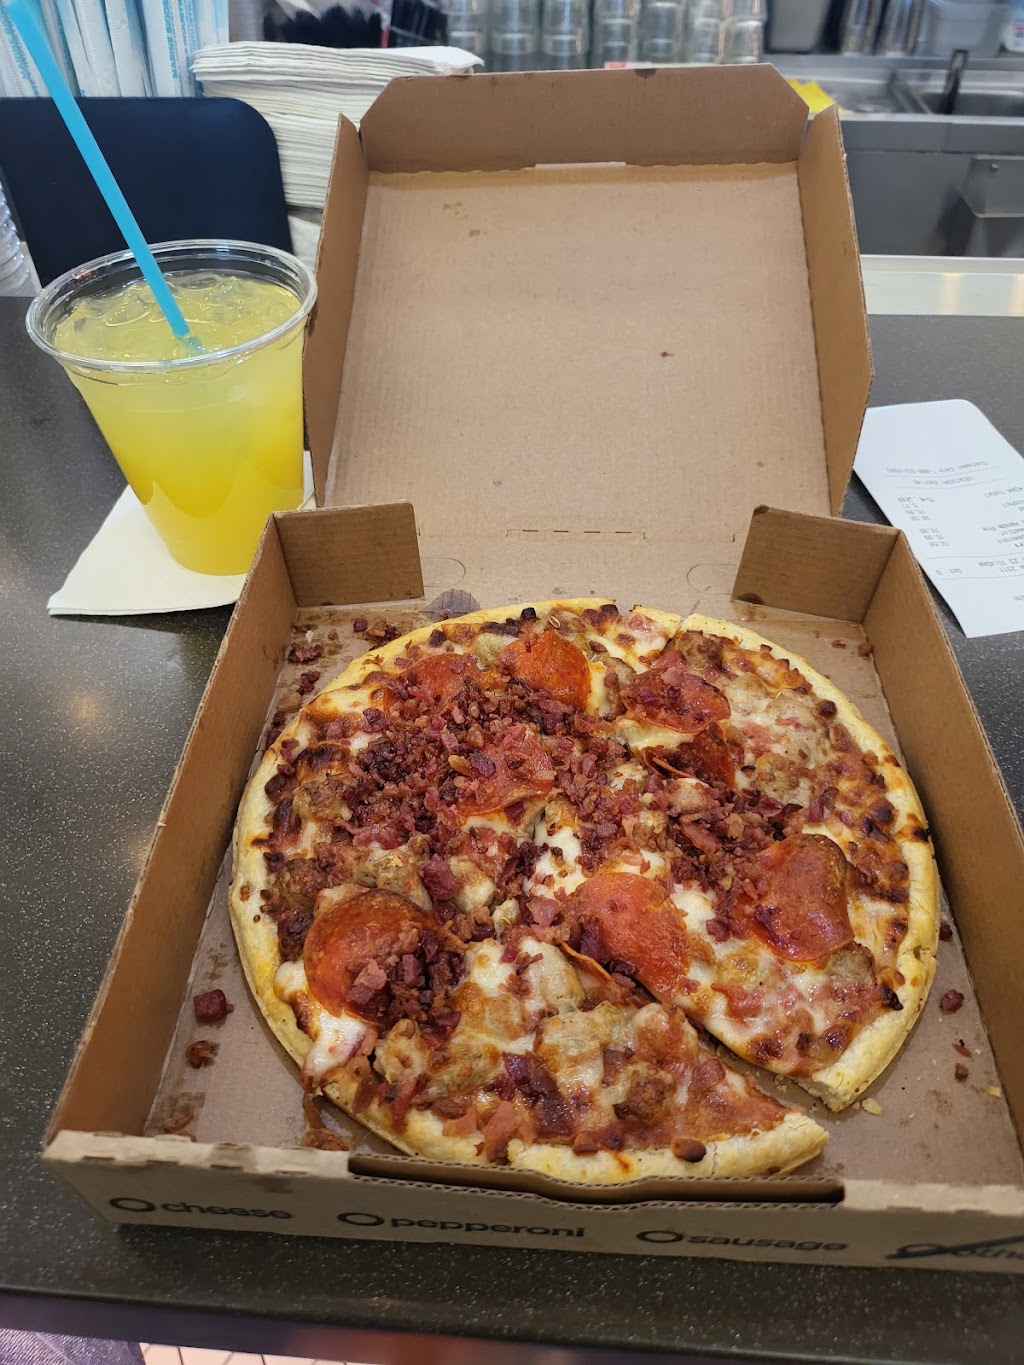 Home Run Inn Pizza | B Concourse, Gate B17, Midway International Airport Terminal, 5700 S Cicero Ave, Chicago, IL 60629 | Phone: (872) 240-7730